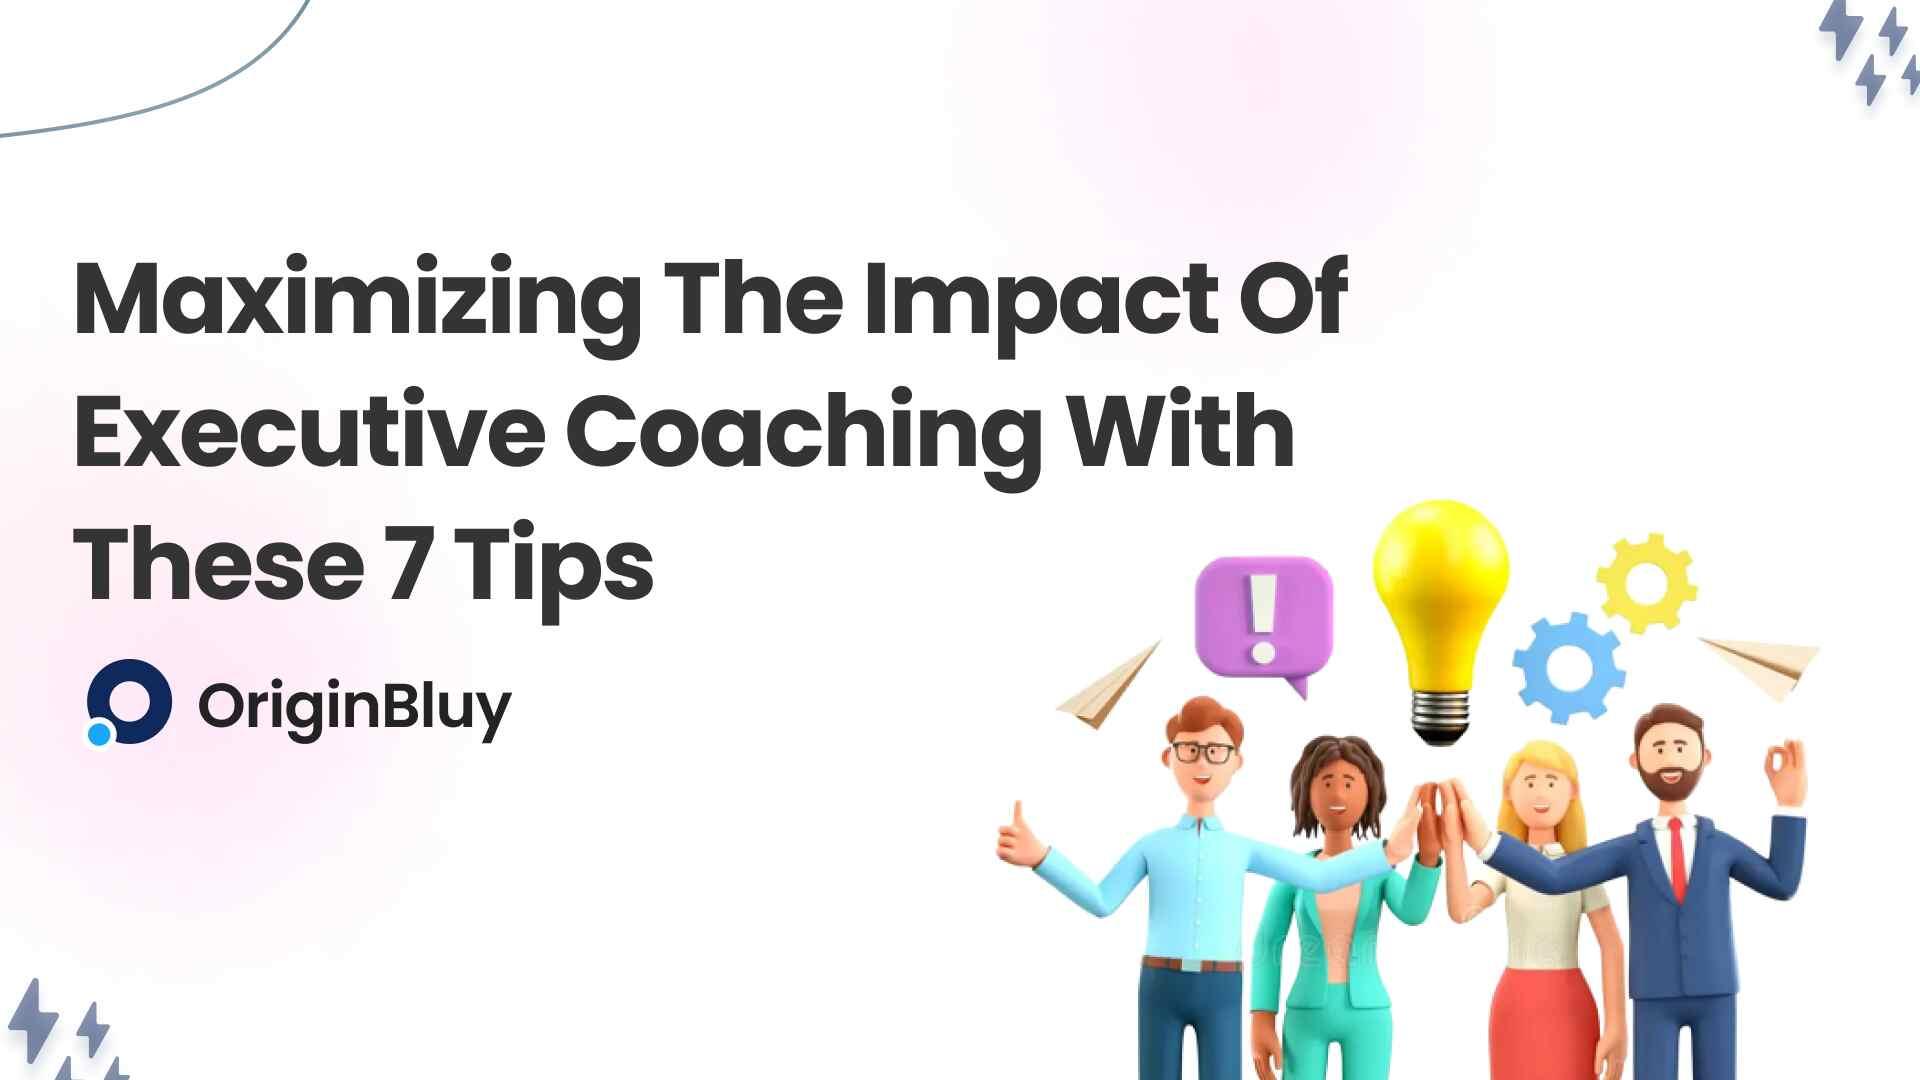 Maximizing the Impact of Executive Coaching With These 7 Tips